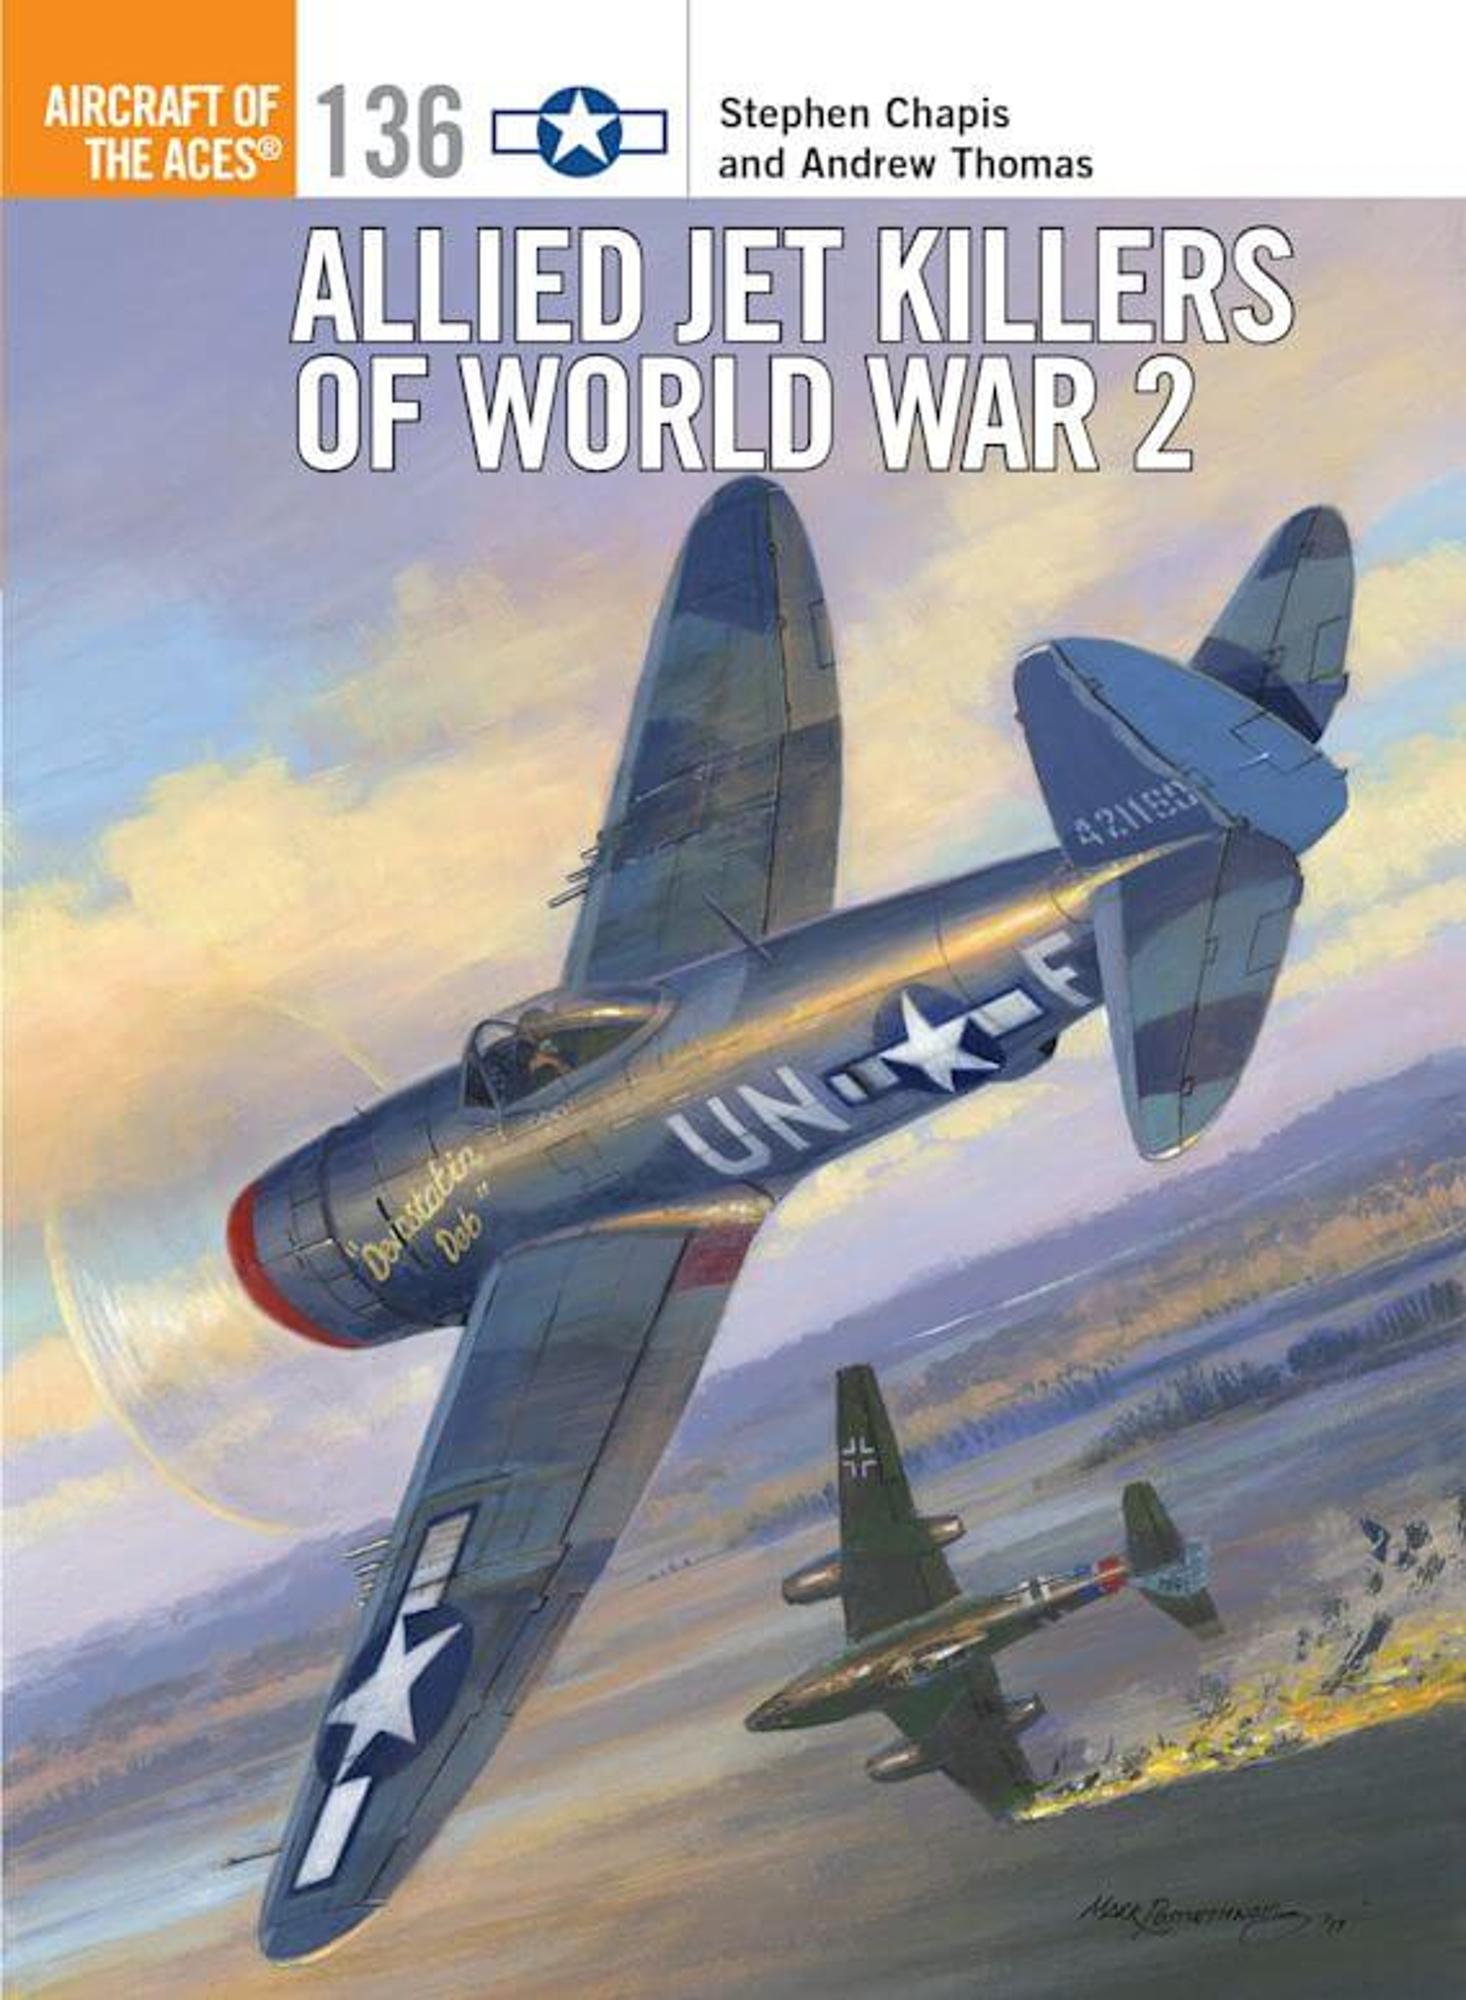 Allied Jet Killers of World War 2: Aircraft of the Aces